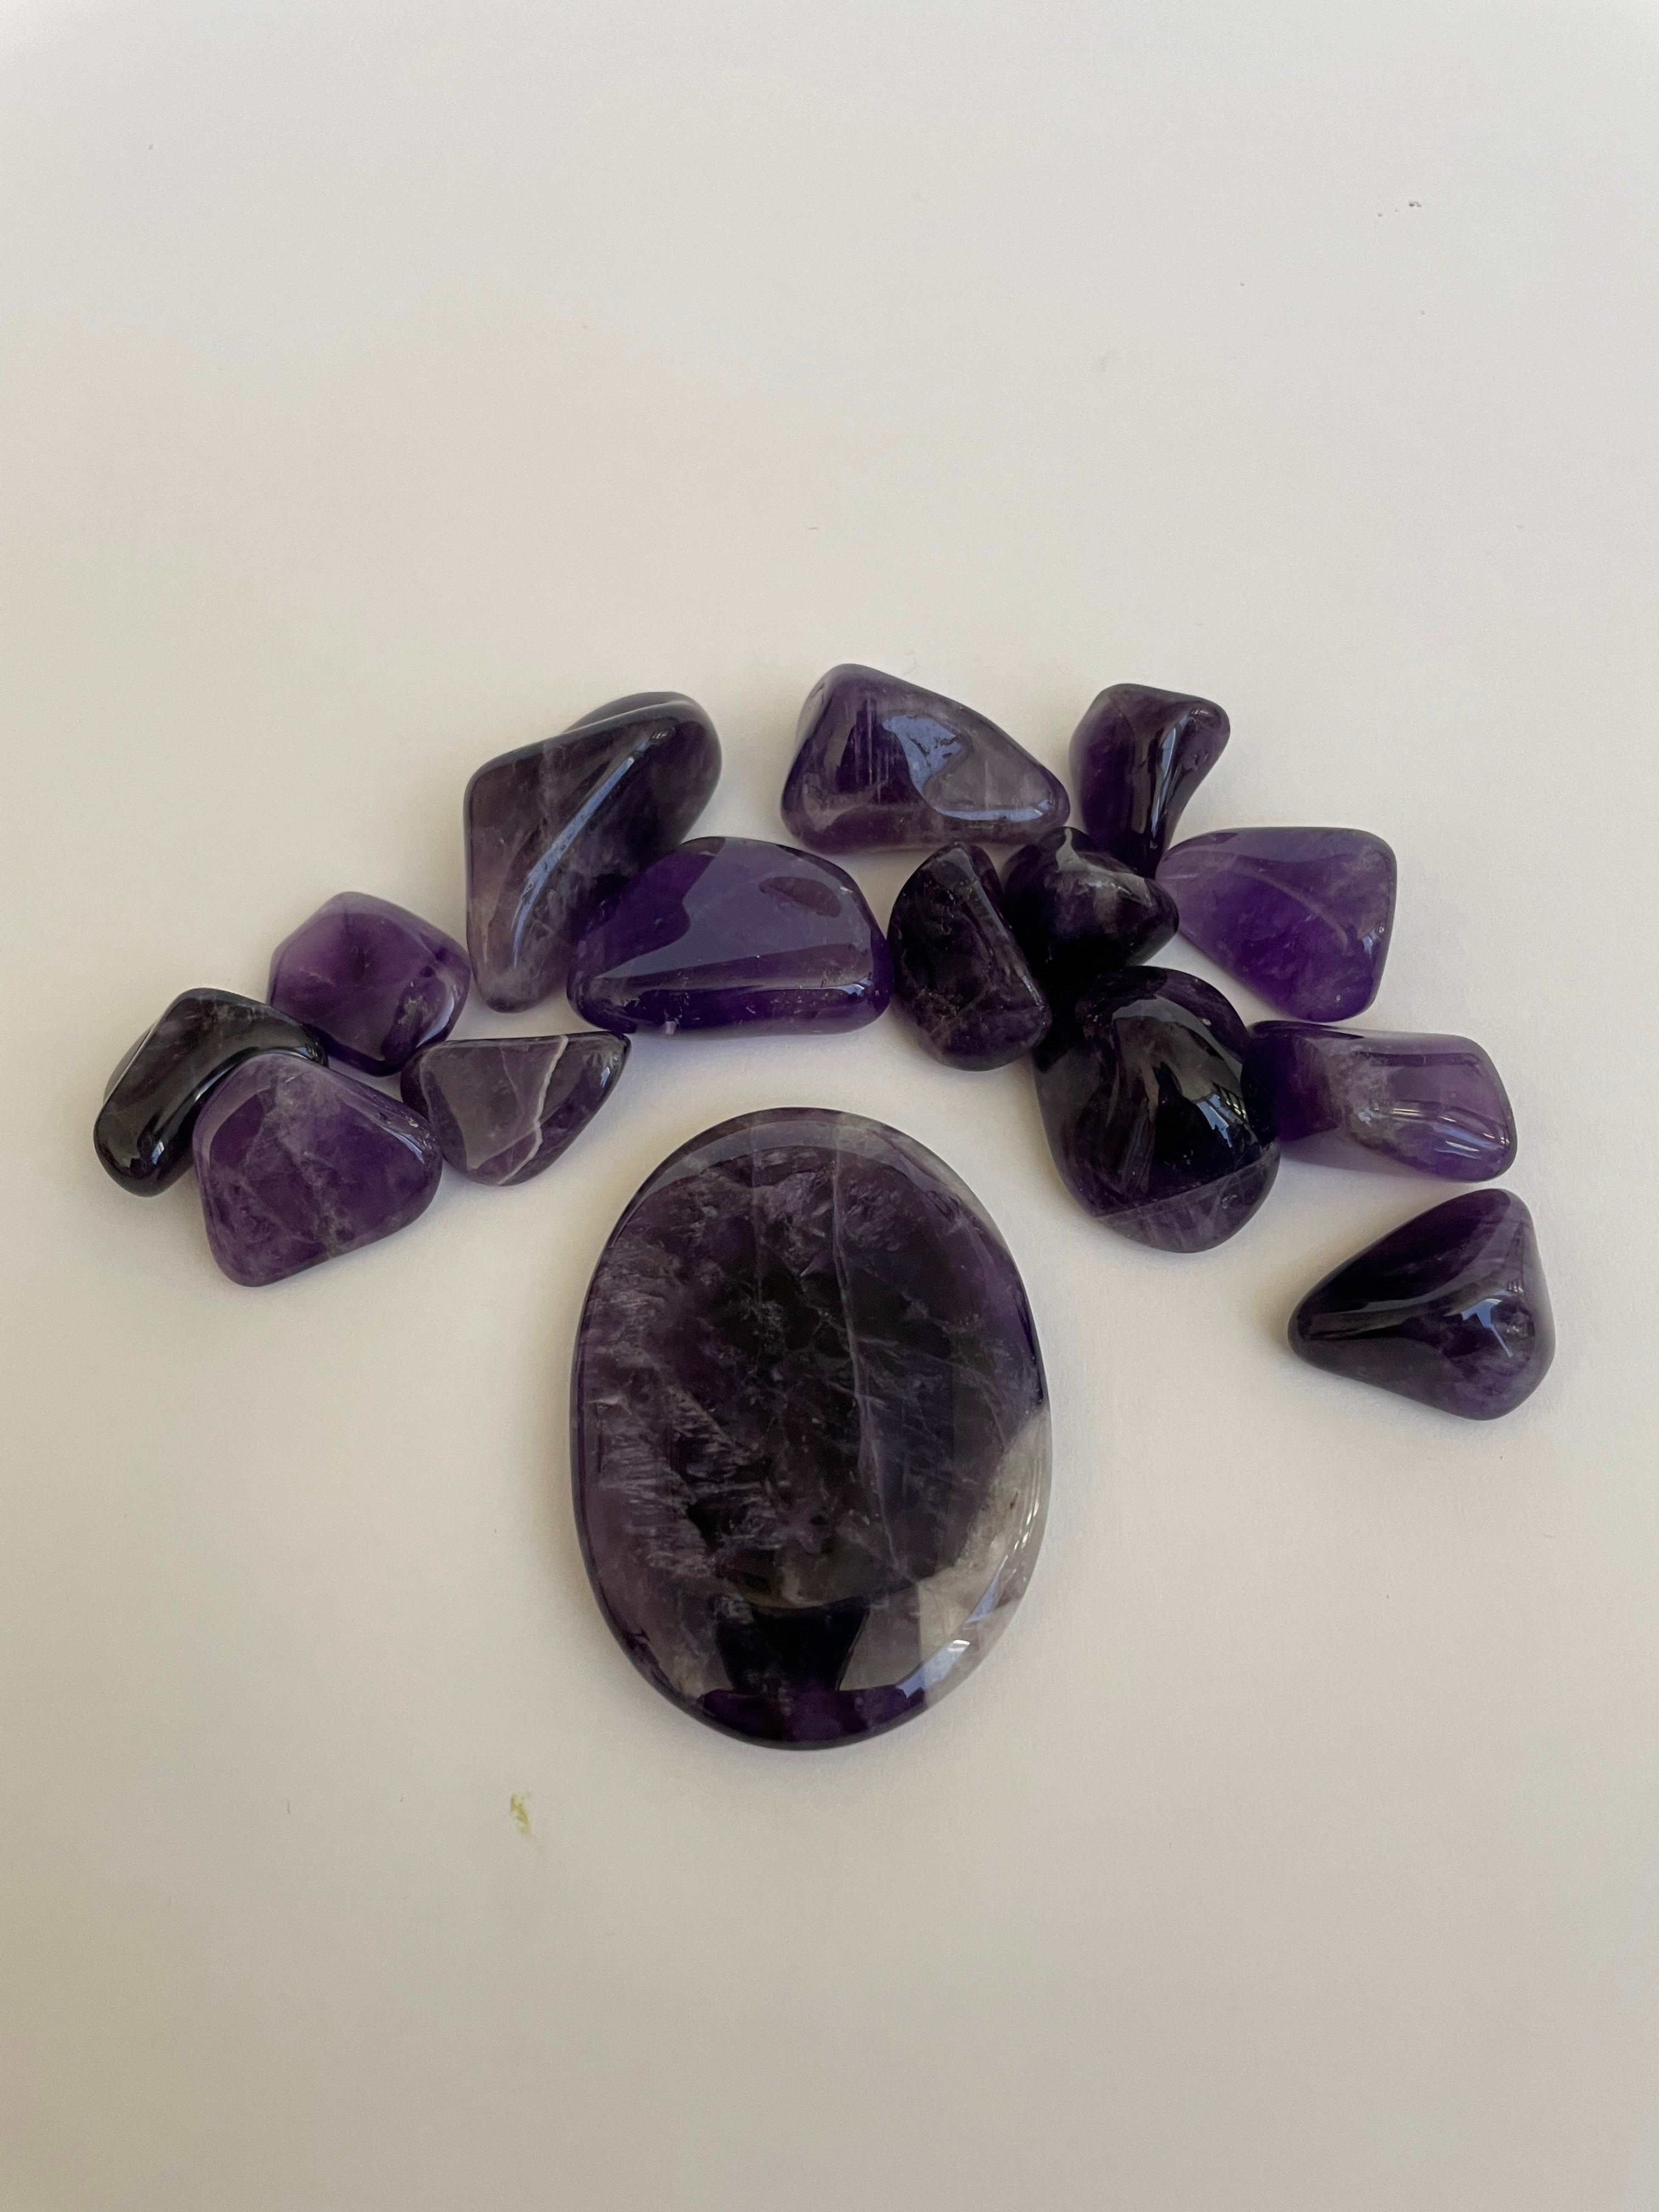 Other side of Chevron amethyst palm stone. Beautiful amethyst palm stone can be used for meditation, healing, for your altar or as a décor item. Amethyst, one of the most spiritual gemstones, heals, cleanses & calms, allowing you to reach meditative & higher consciousness levels more easily. It also helps to dispel negative emotional states and more. Chevron amethyst is a combination of amethyst and white quartz and when you add the quartz you get additional qualities. 2" long. Cost $12.